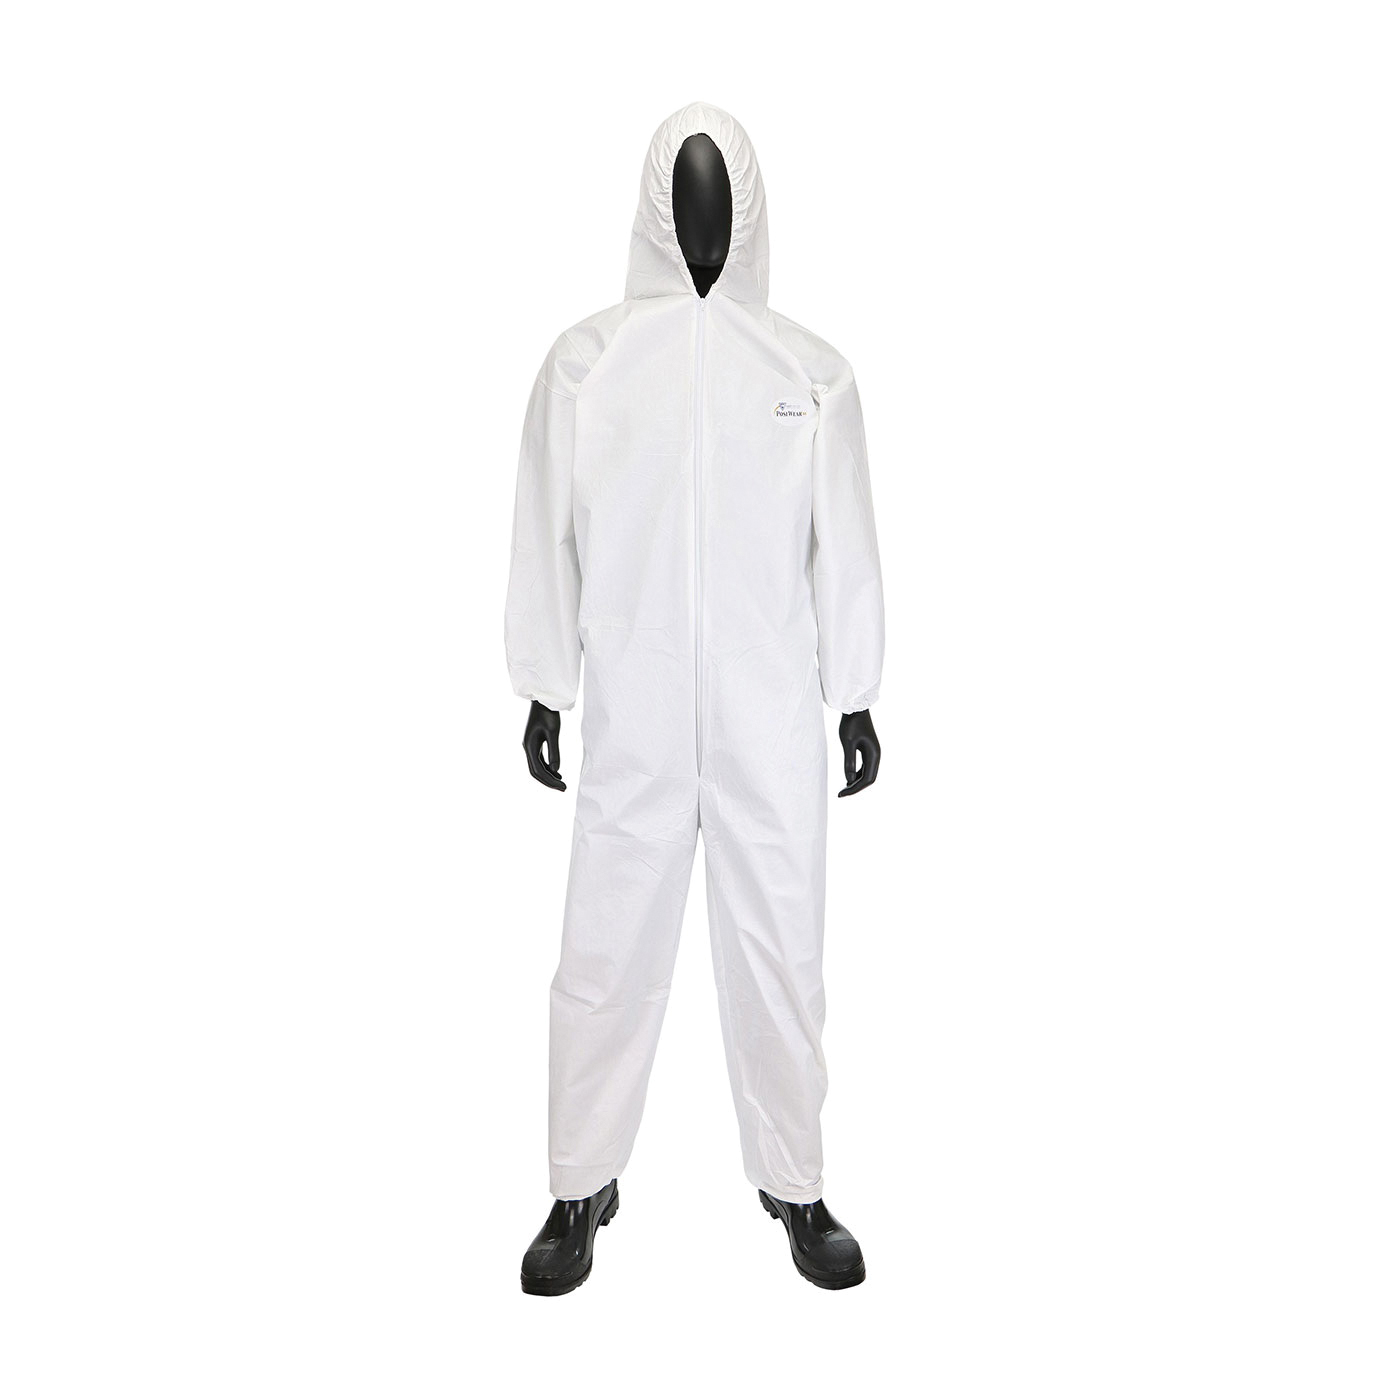 PIP® West Chester® Posi-Wear® BA™ 3606/6XL Latex-Free Disposable Coverall With Attached Hood, 6XL, White, Film Laminate/Polypropylene